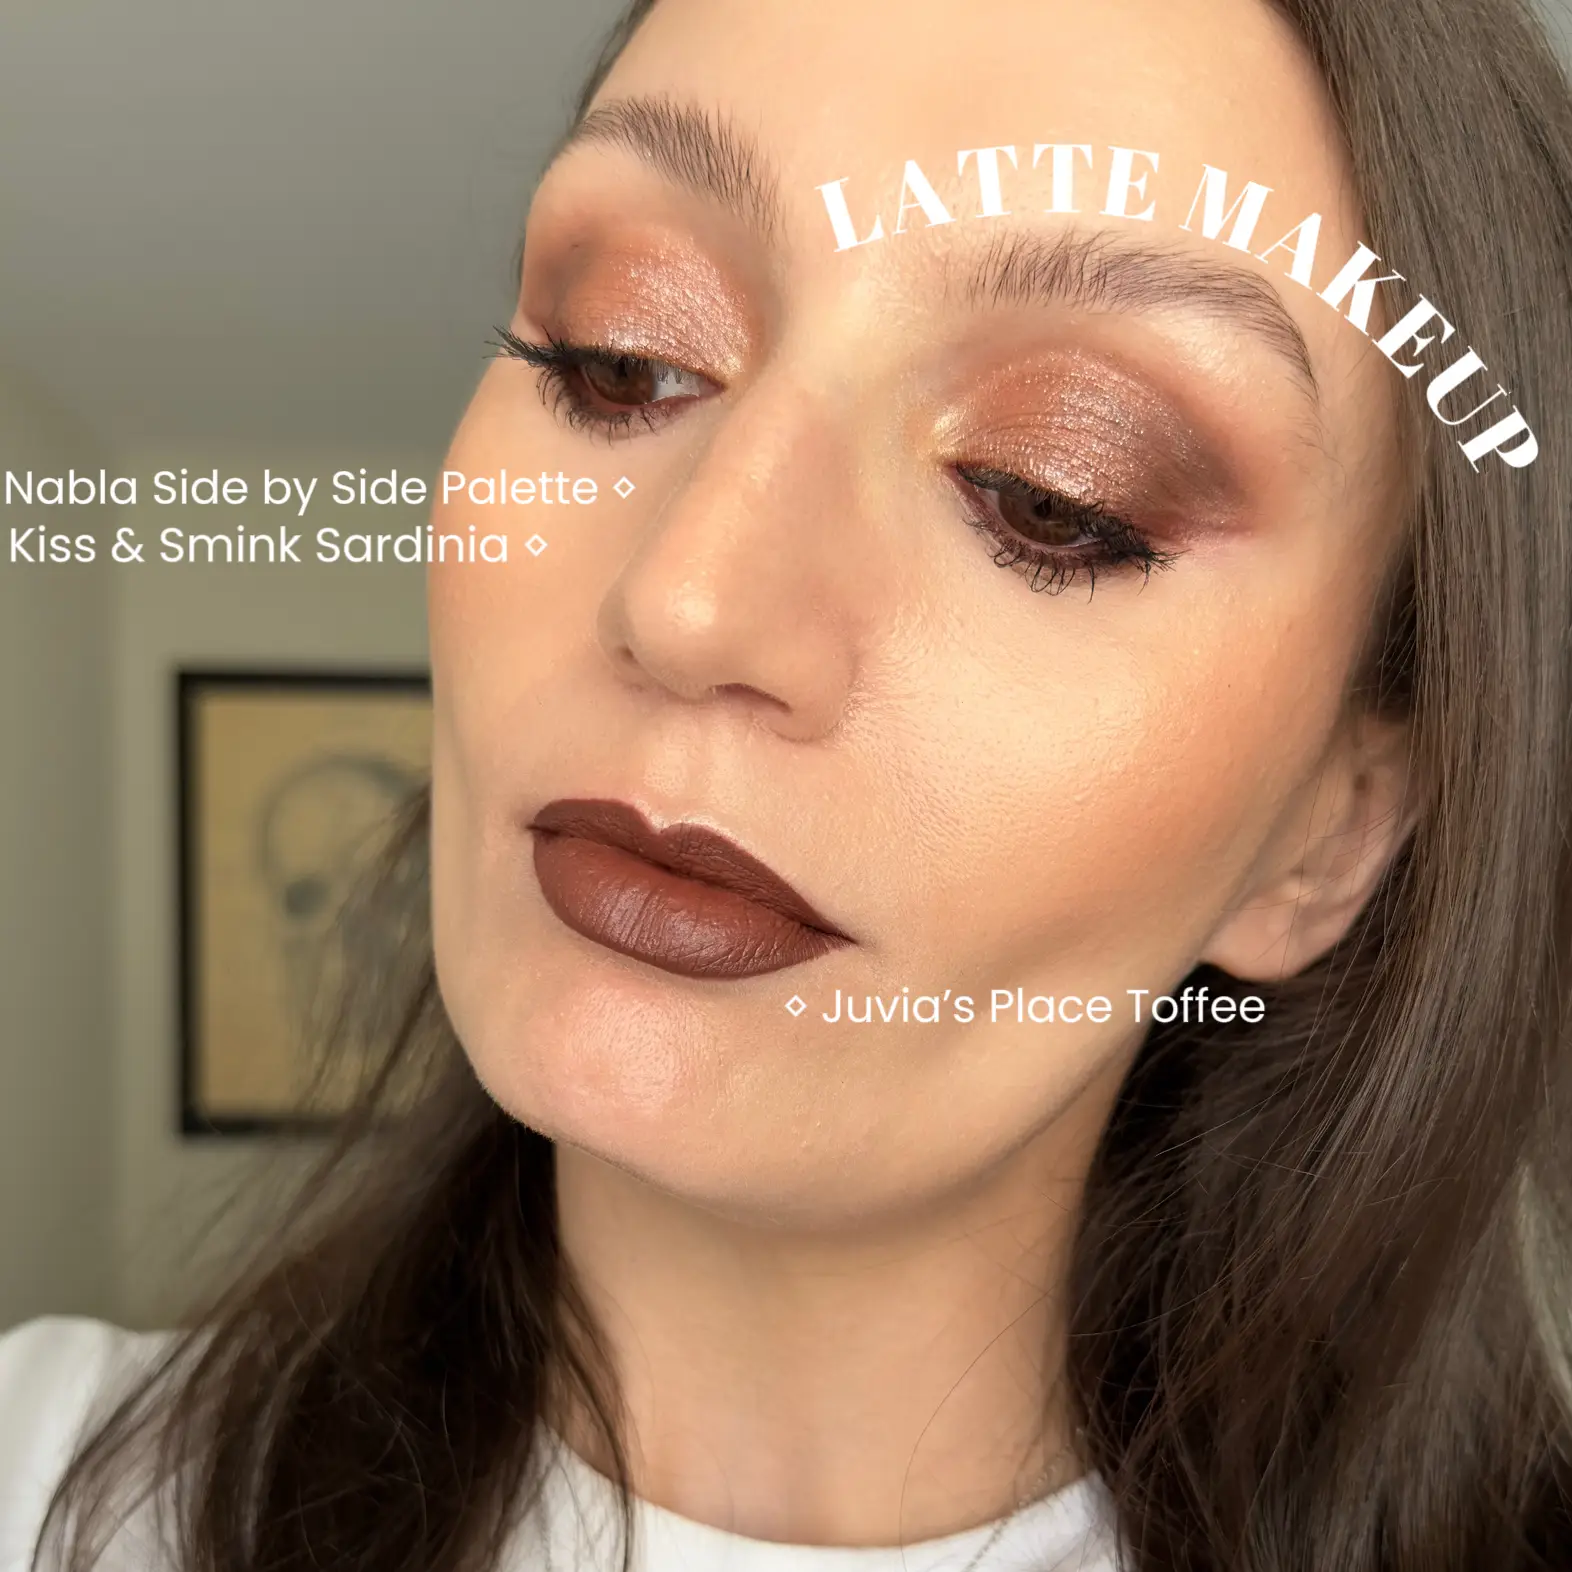 Latte Makeup Gallery Posted By